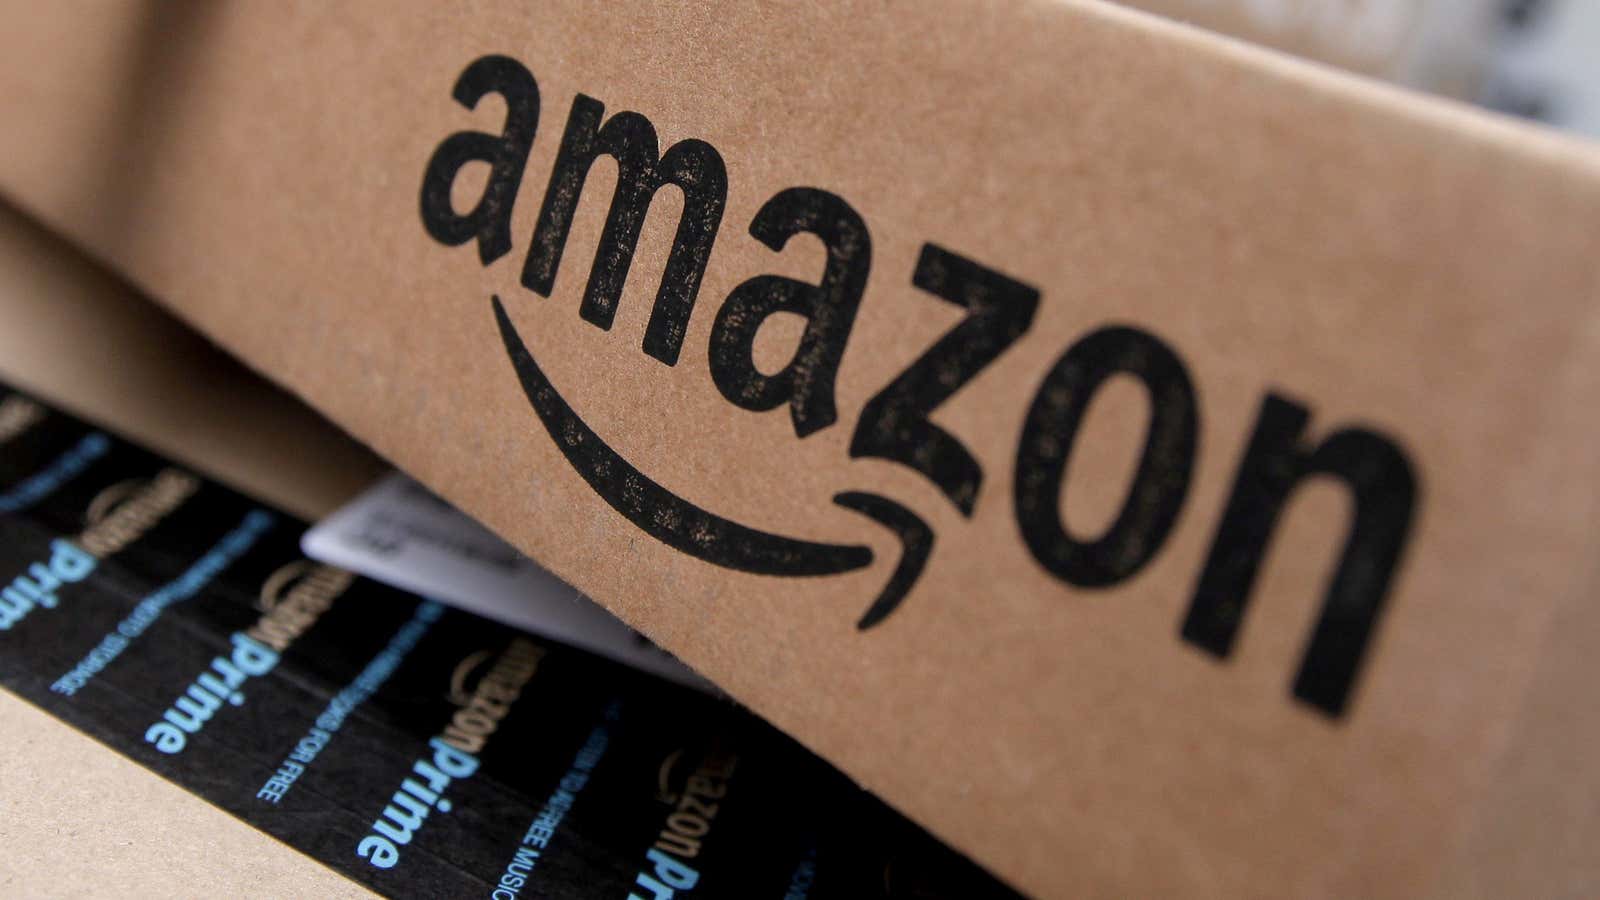 Already a trillion-dollar company, Amazon could arguably be worth even more.